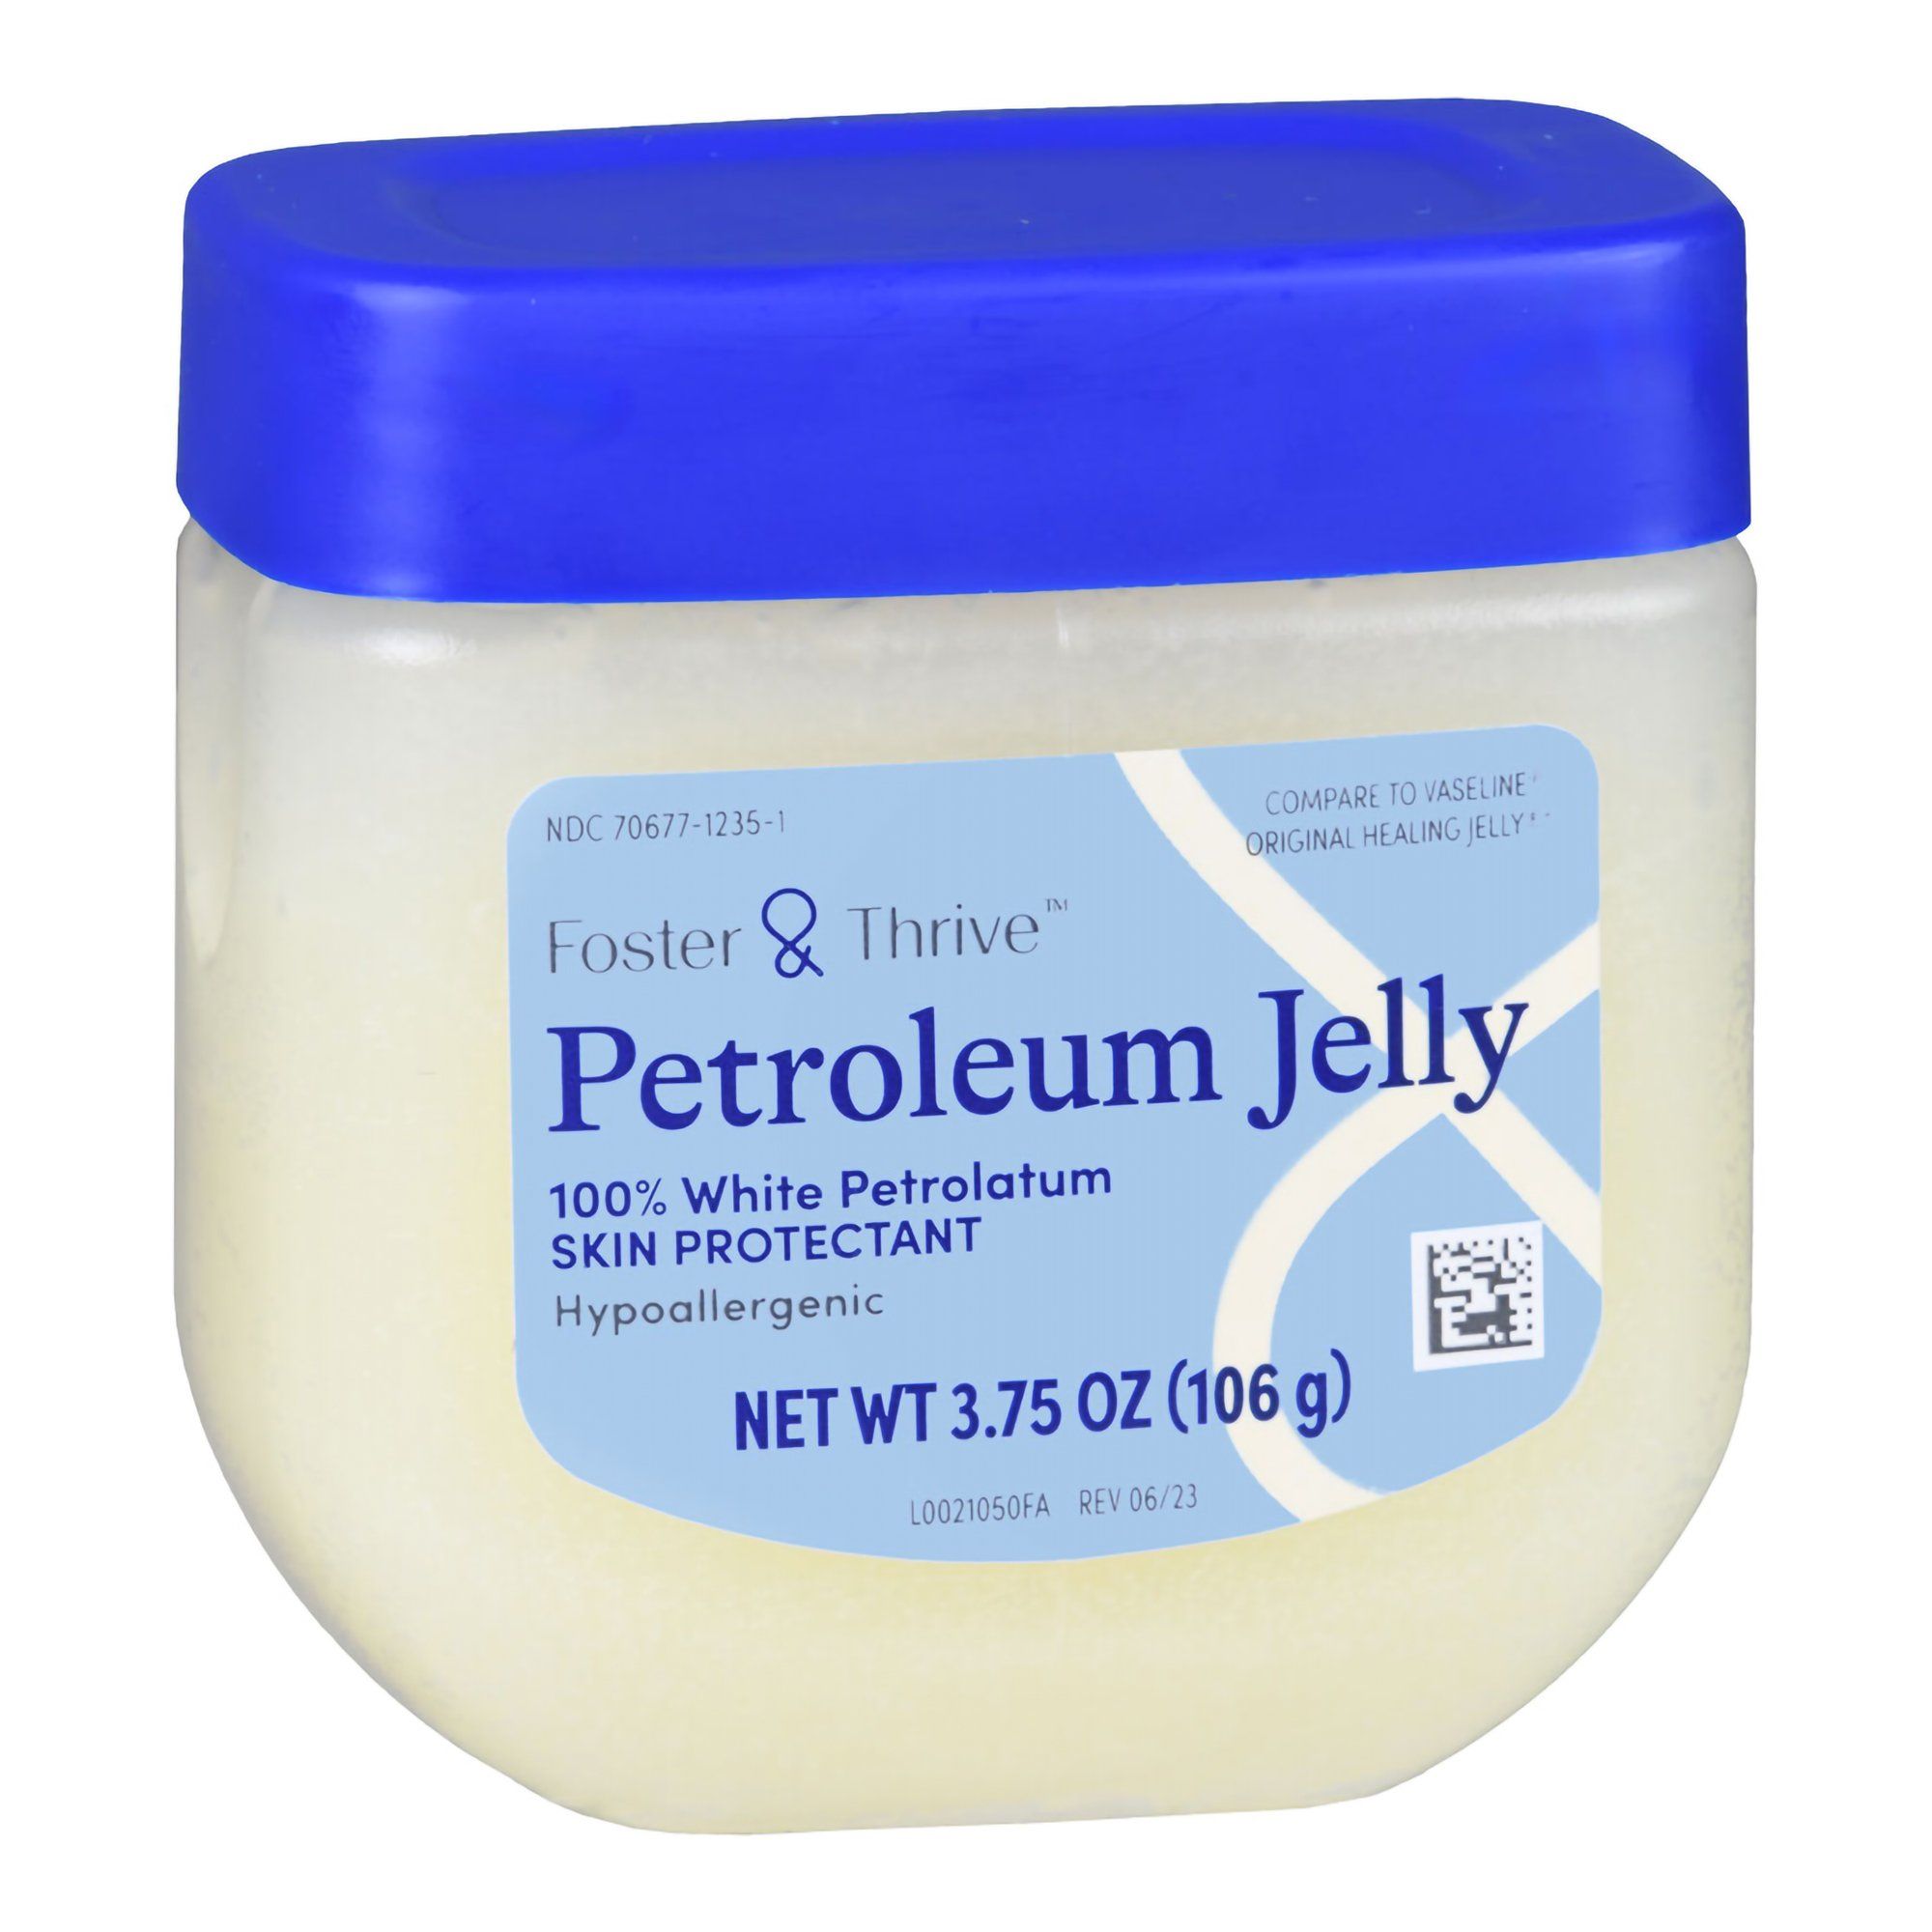 Foster & Thrive Petroleum Jelly - 3.75 oz - 1 ct